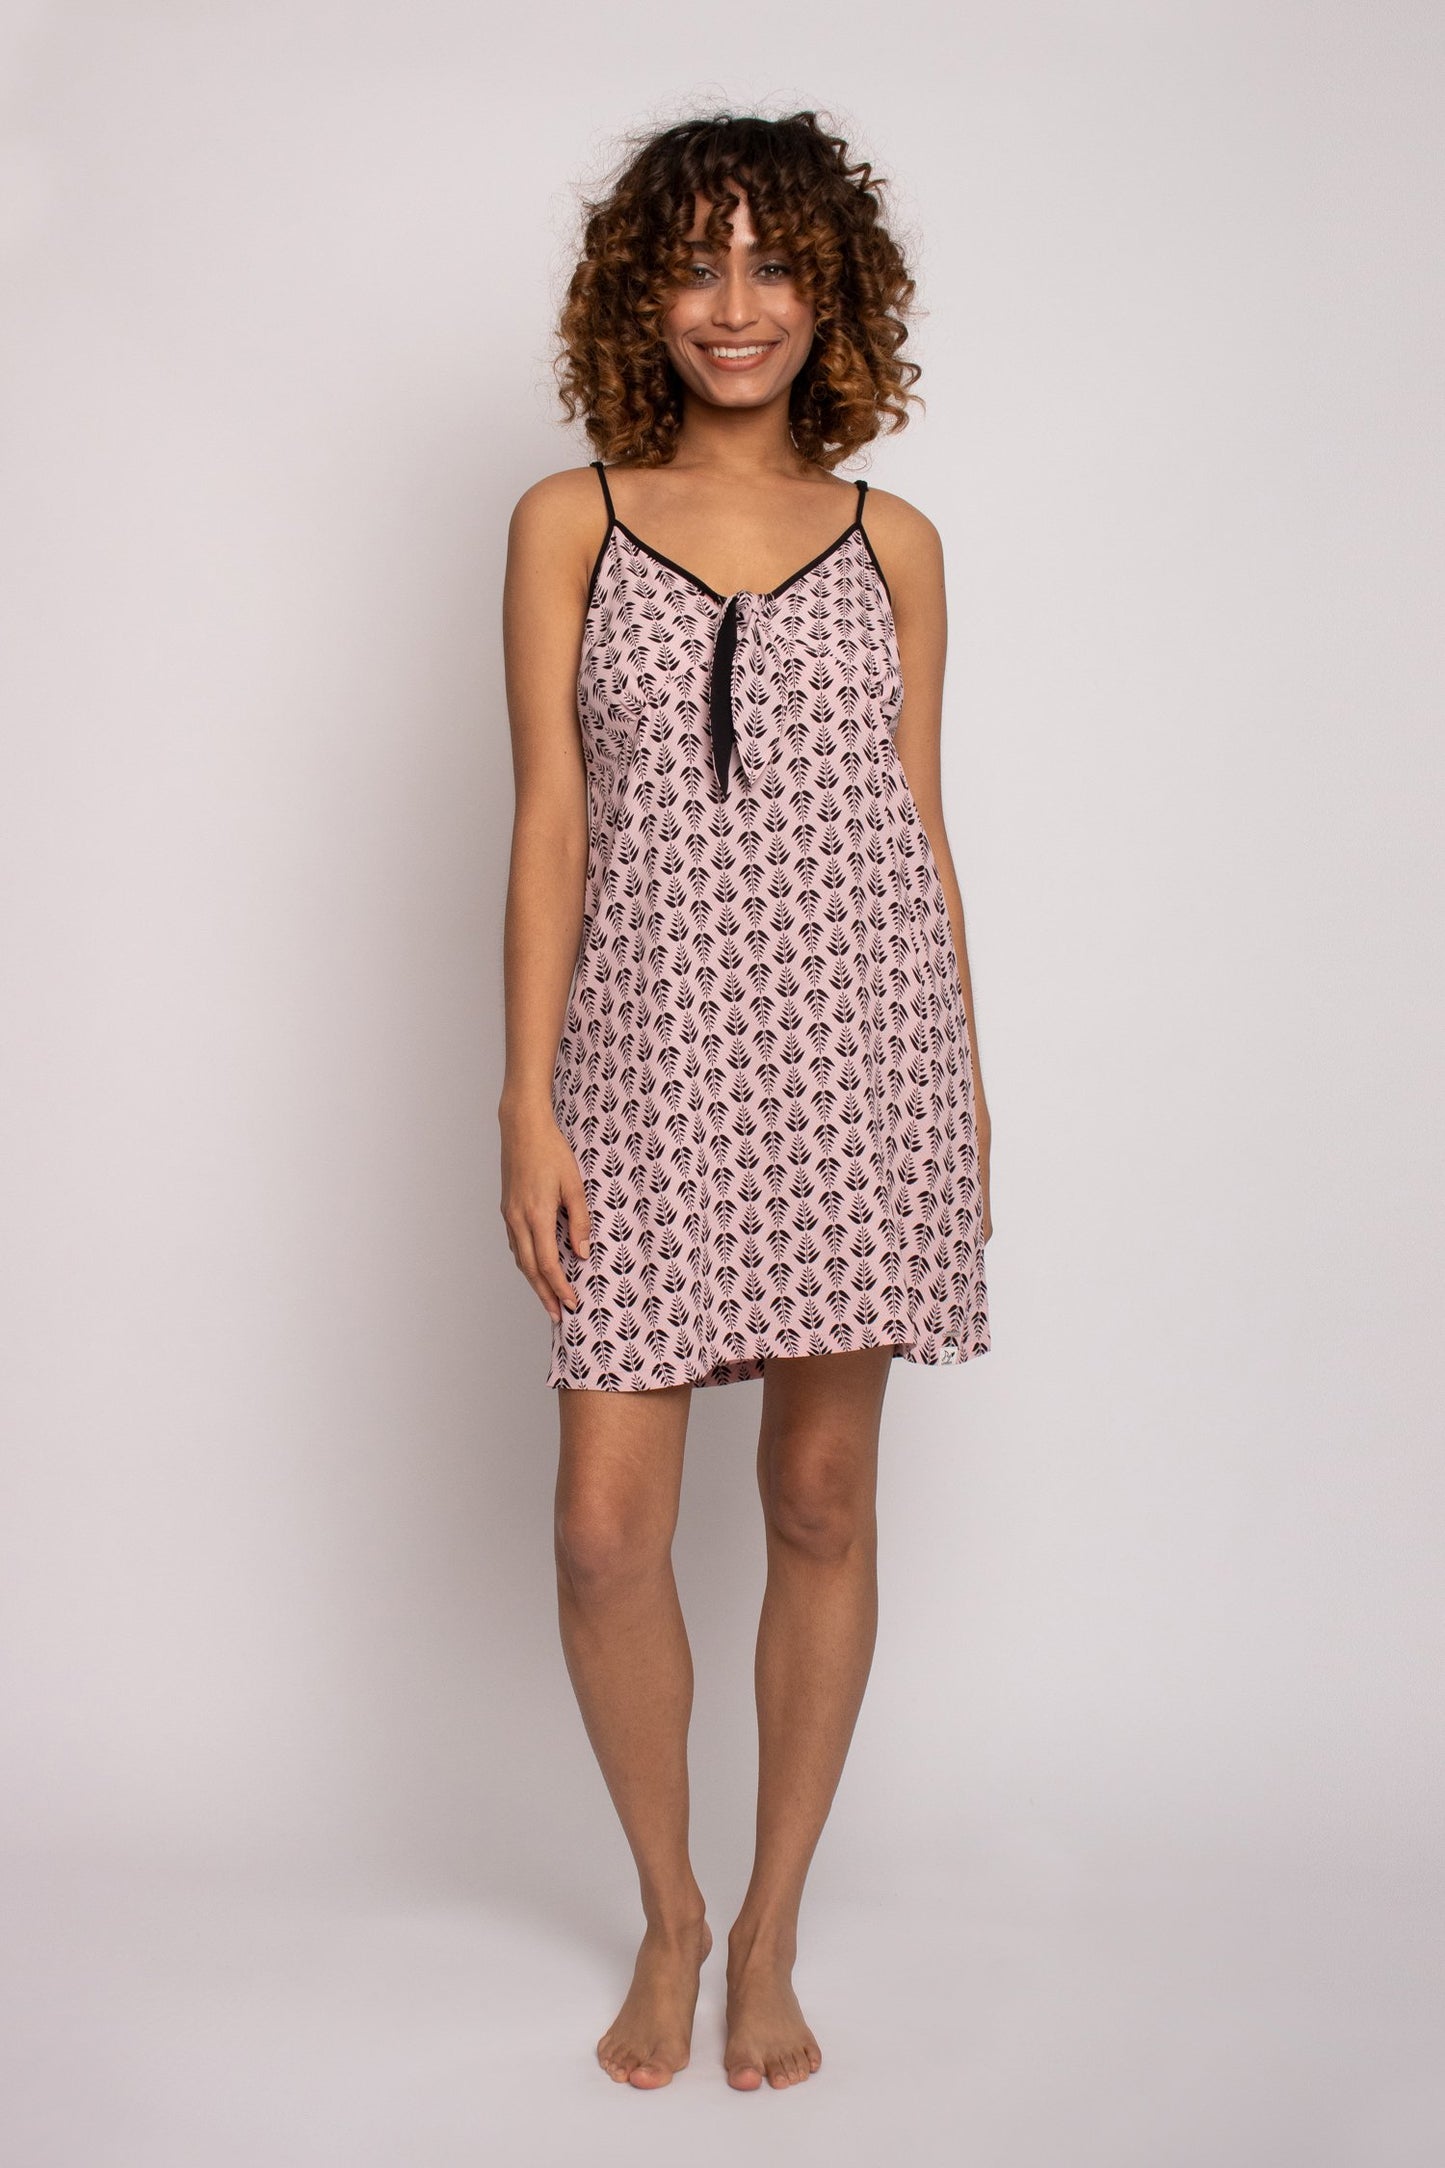 Women's EcoVero Chemise Nightdress in Pink with leaf print and adjustable straps from Pretty You London